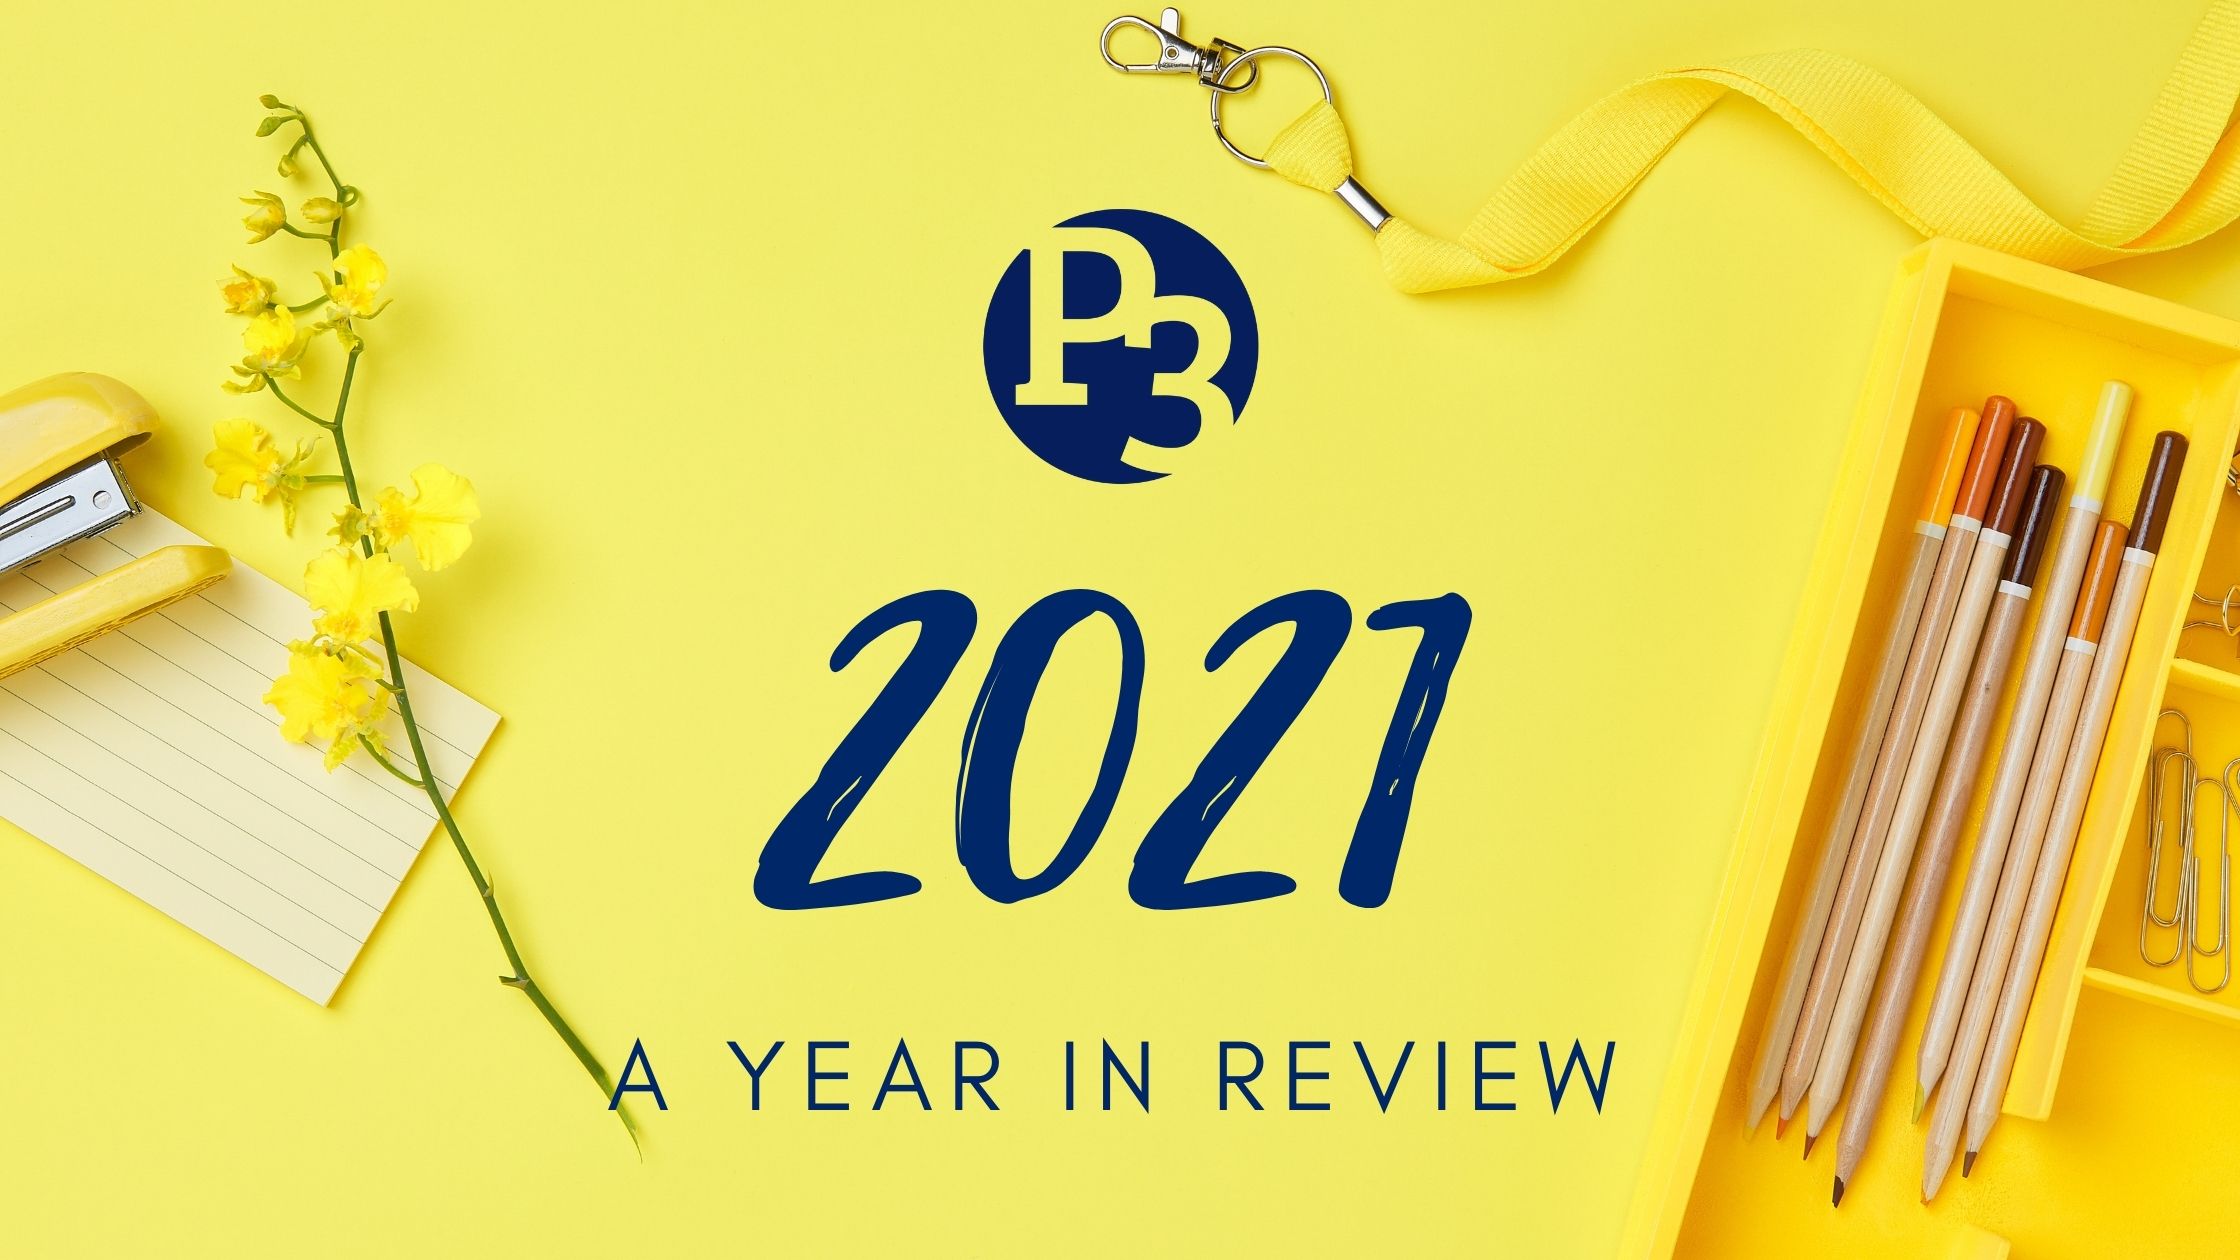 P3 2021 A Year in Review - Blog Banner